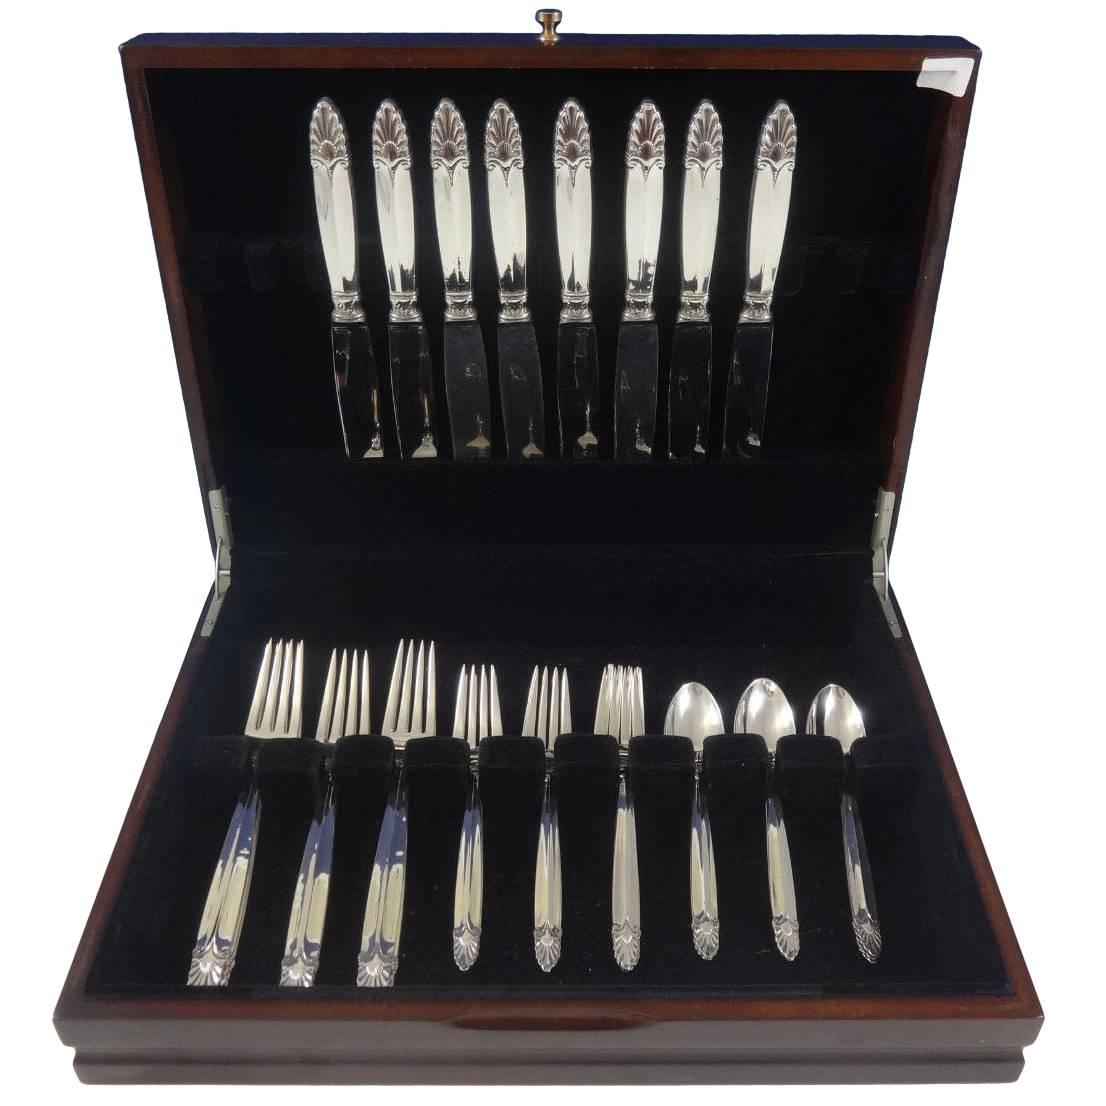 Trianon by International Sterling Silver Flatware Set of Eight Service 43 Pieces